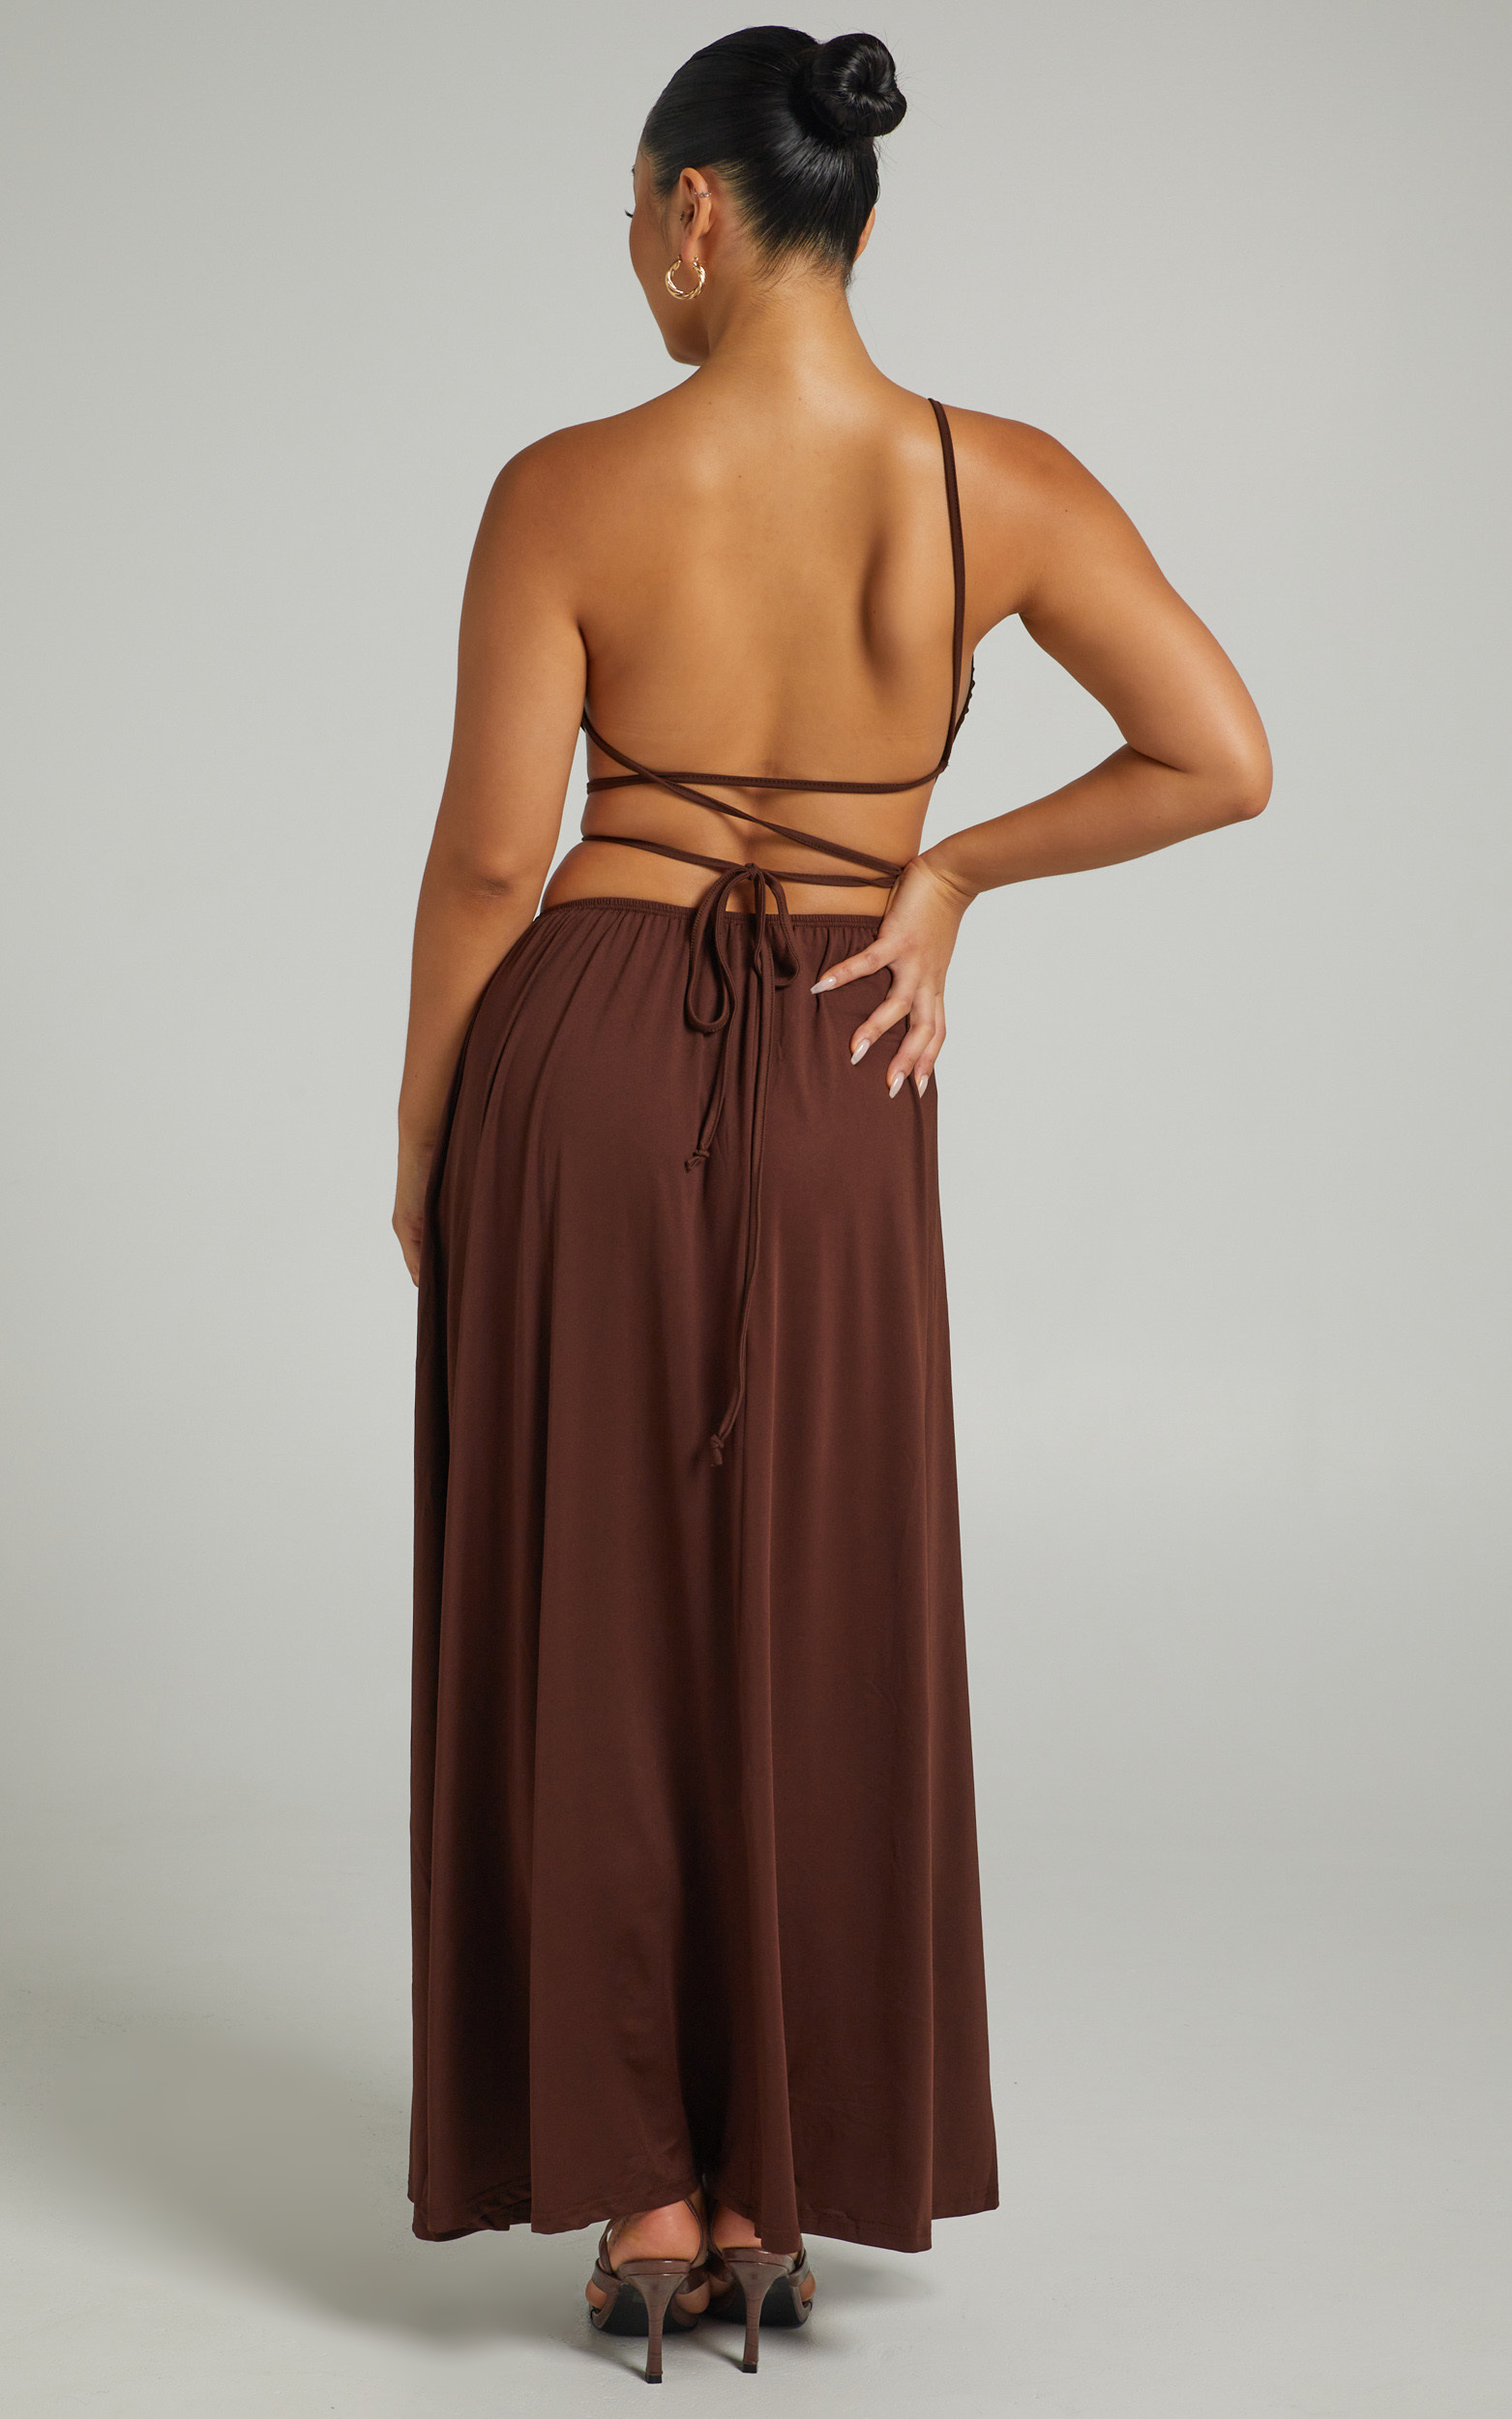 Ornella Maxi Dress with Tie up Details in Chocolate - L, BRN1, hi-res image number null